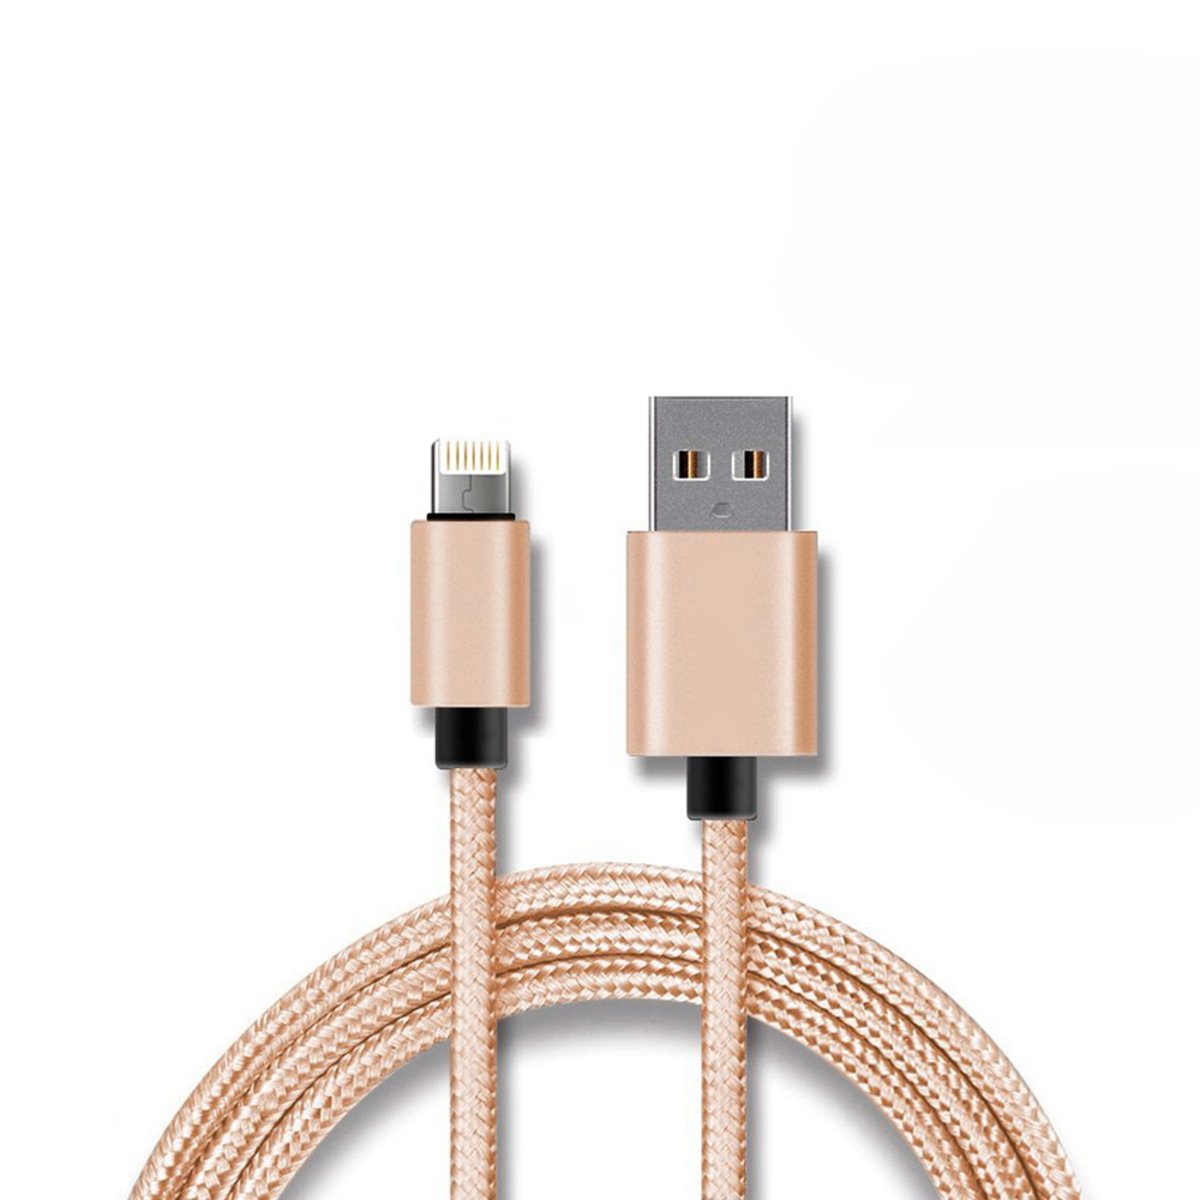 Iends 2 in 1 USB Cable With Lightning and Micro USB Connector CA694